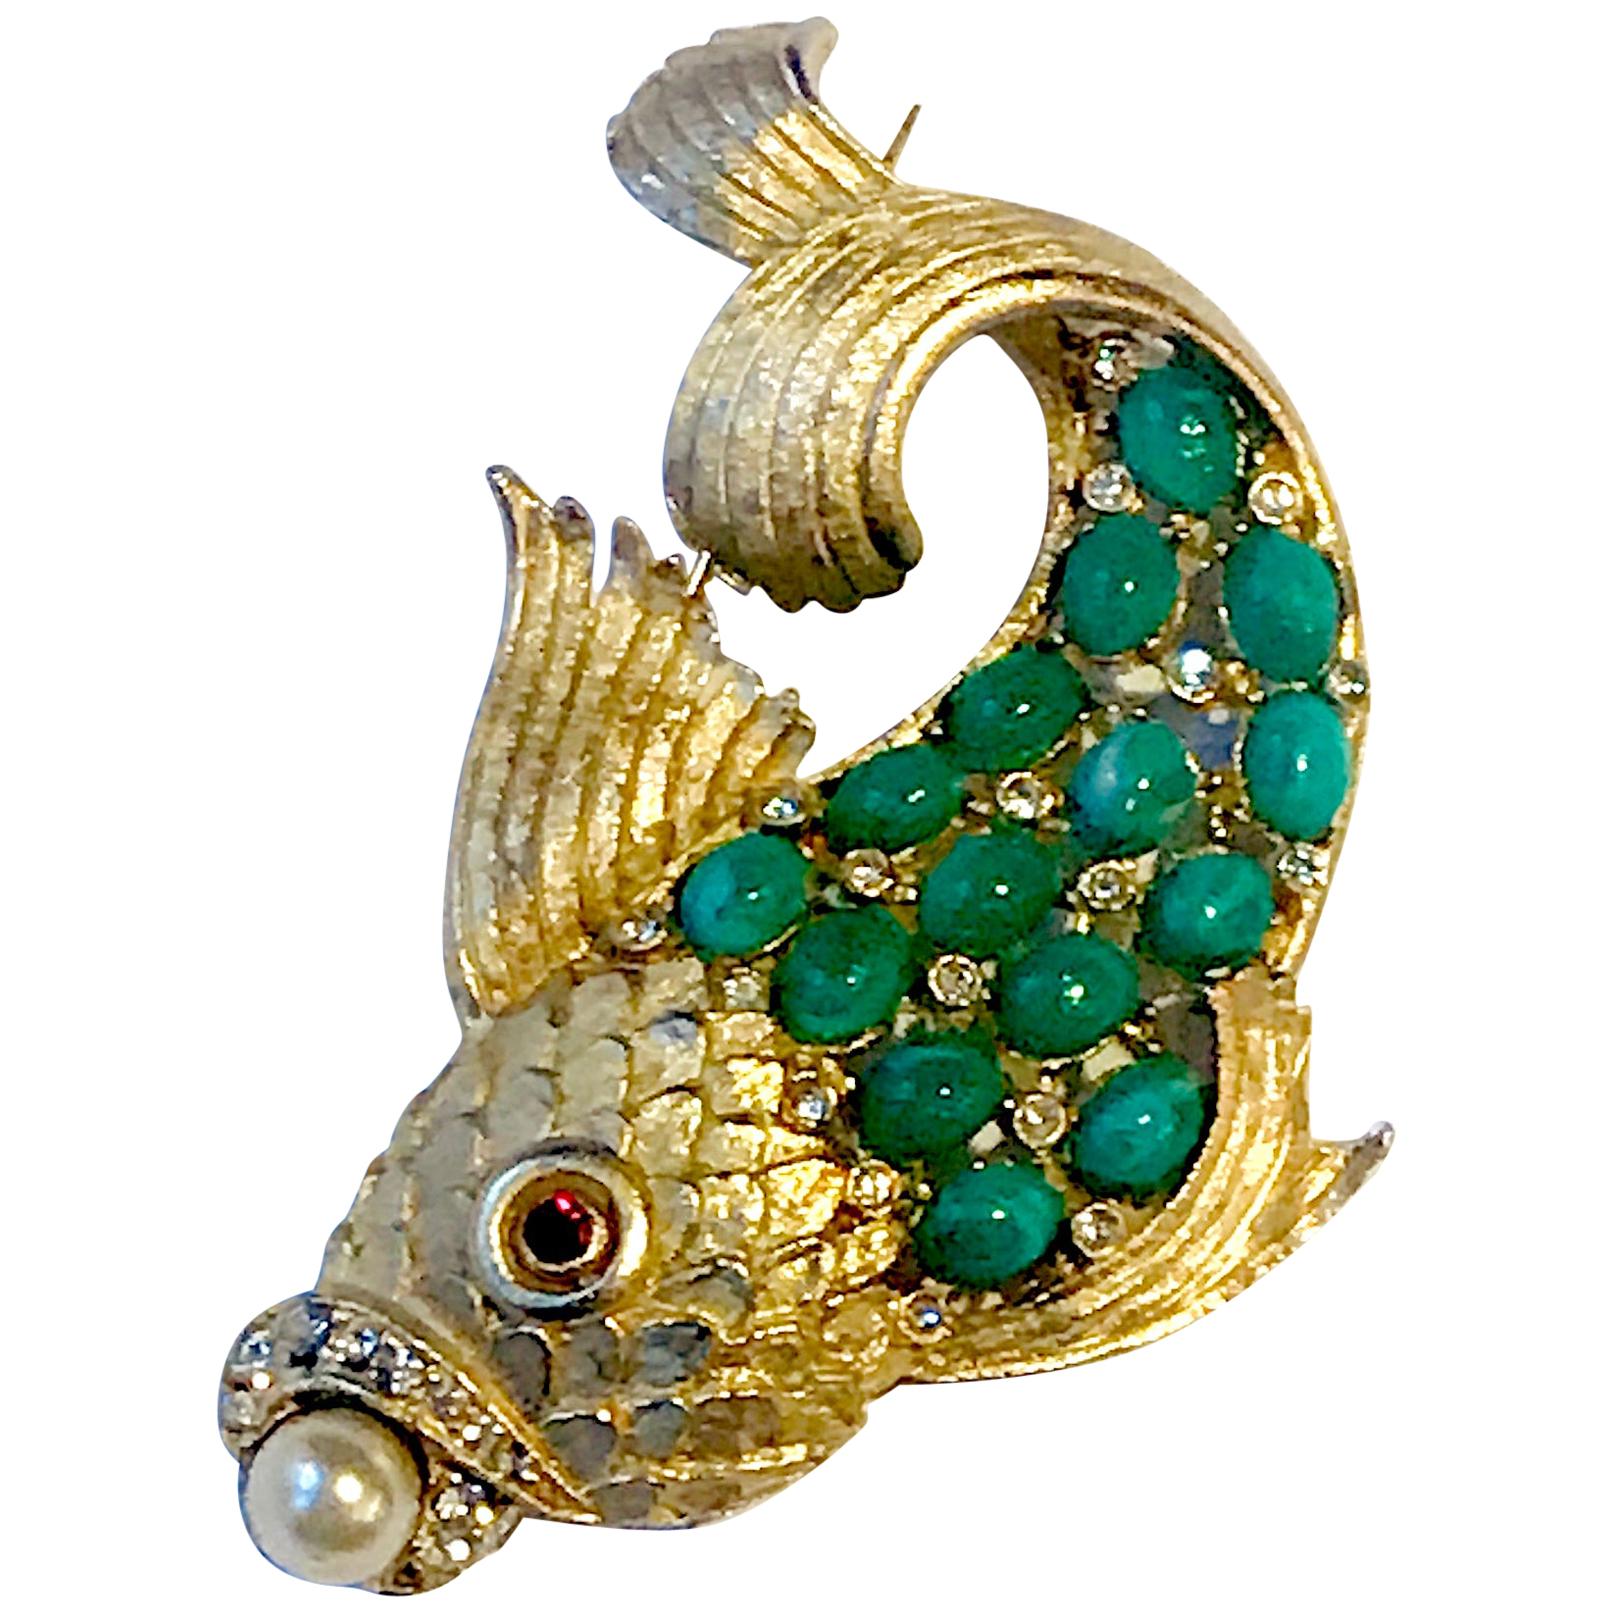 1950s Satin Gold Figural Brooch of Fish with Green Cabochon